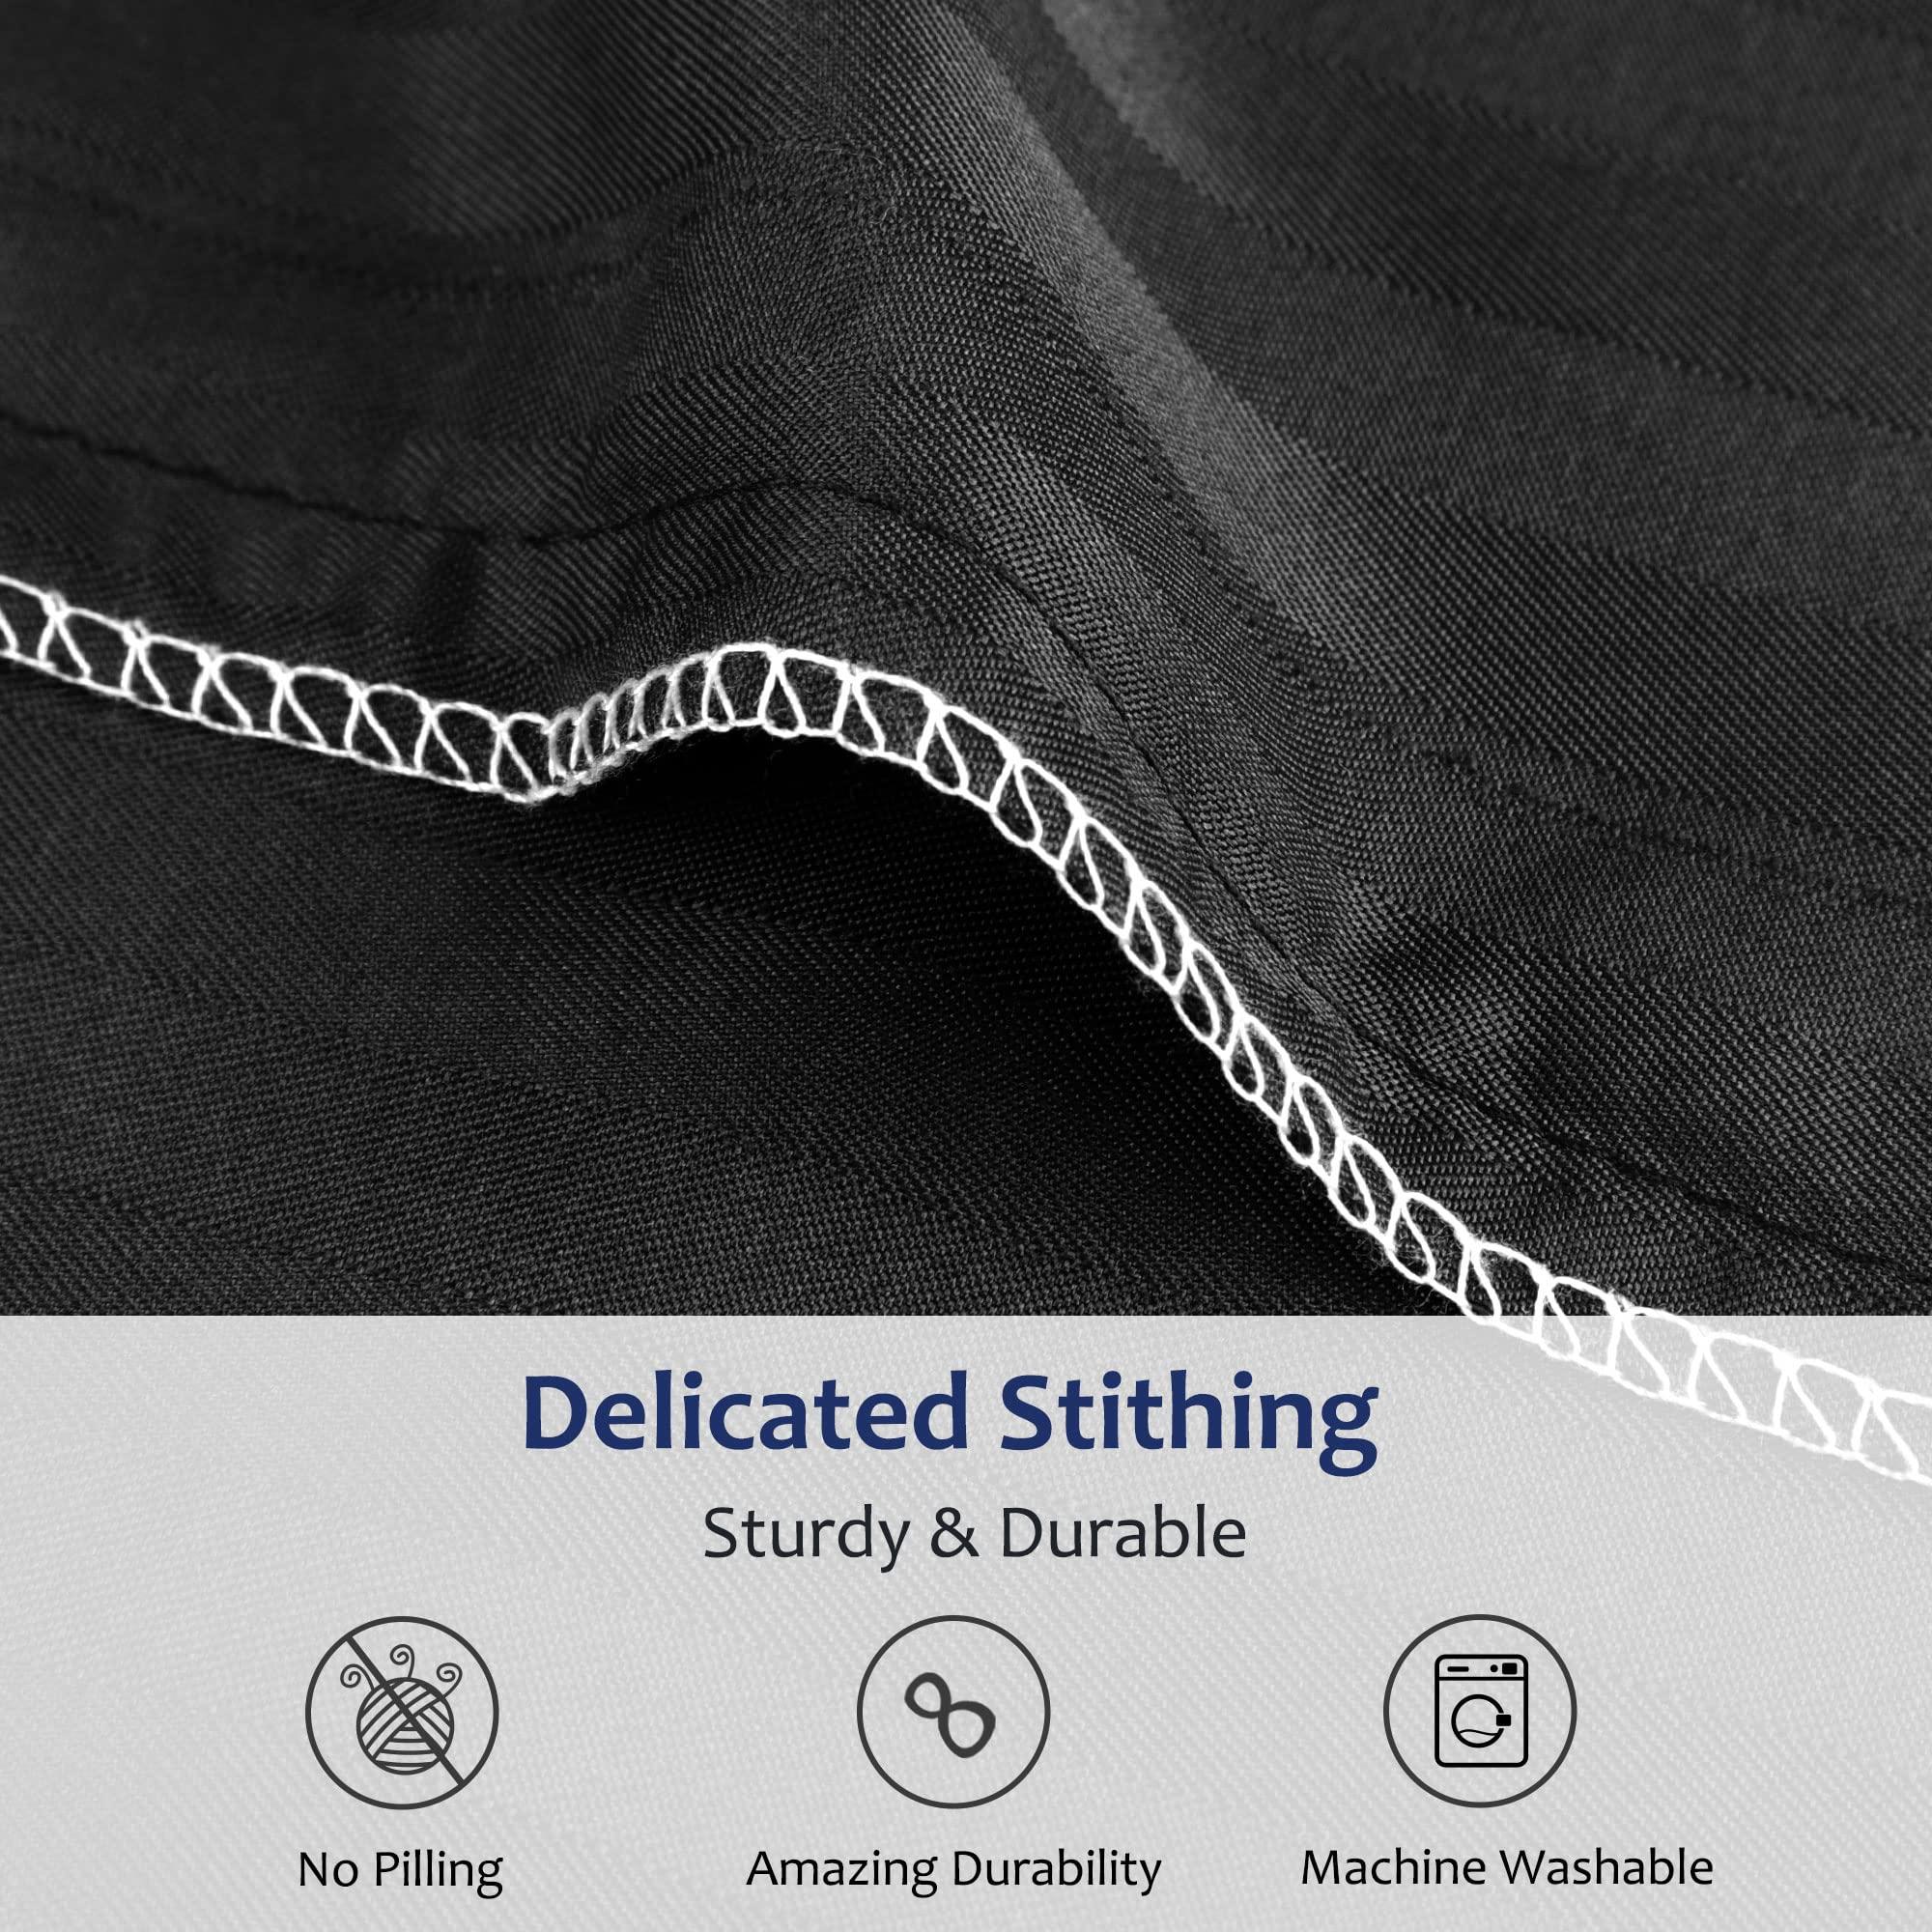 PiccoCasa 100GSM Microfiber Striped Bed Fitted Sheet, 16 Inch Deep Pocket Bed Mattress Cover, Durable Soft Breathable Wrinkle Resistant Bottom Sheets Black Super King 4